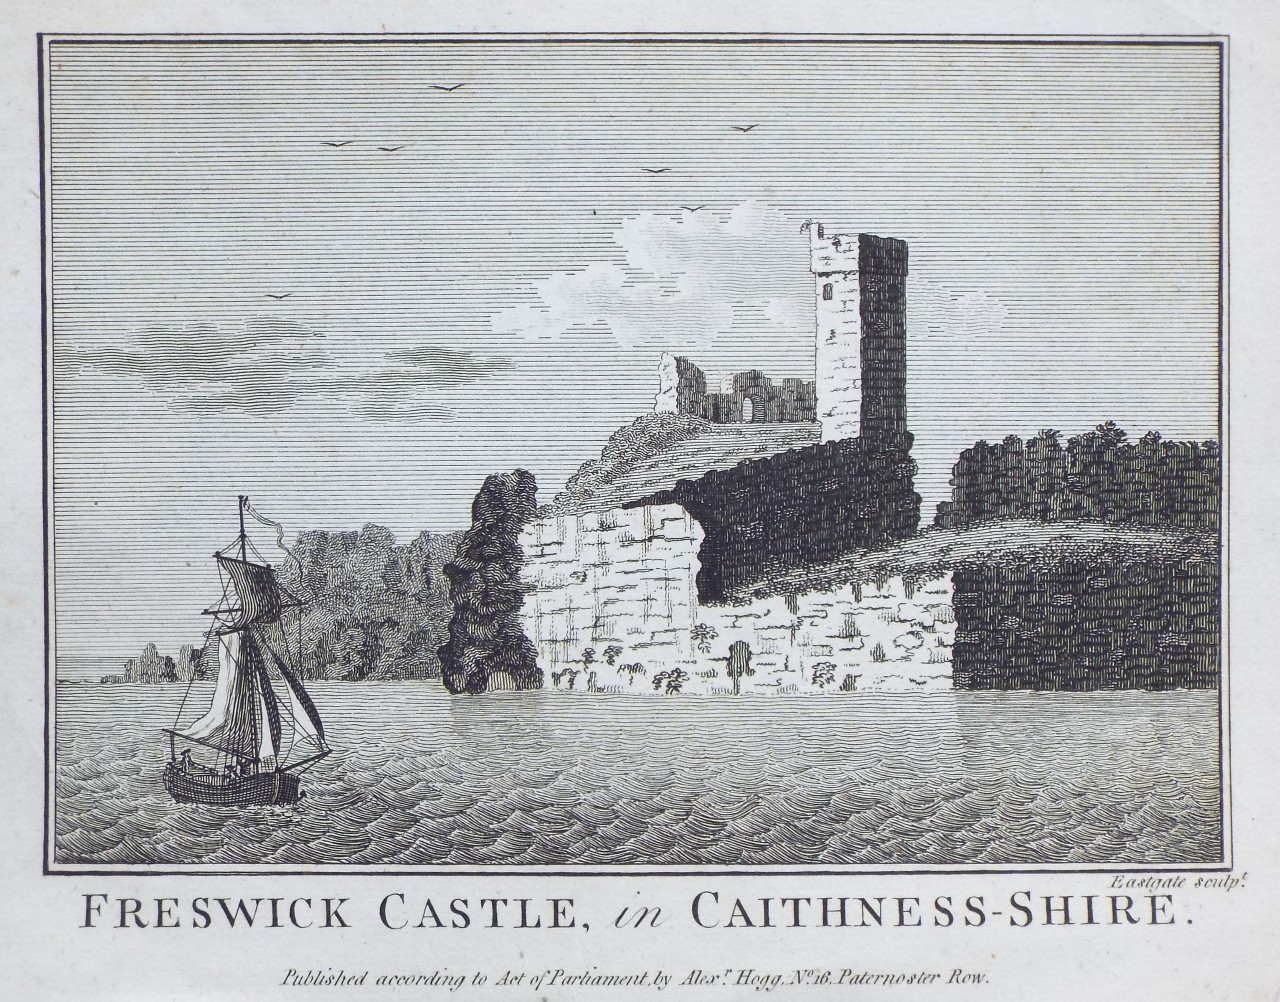 Print - Freswick Castle, in Caithness-shire. - 